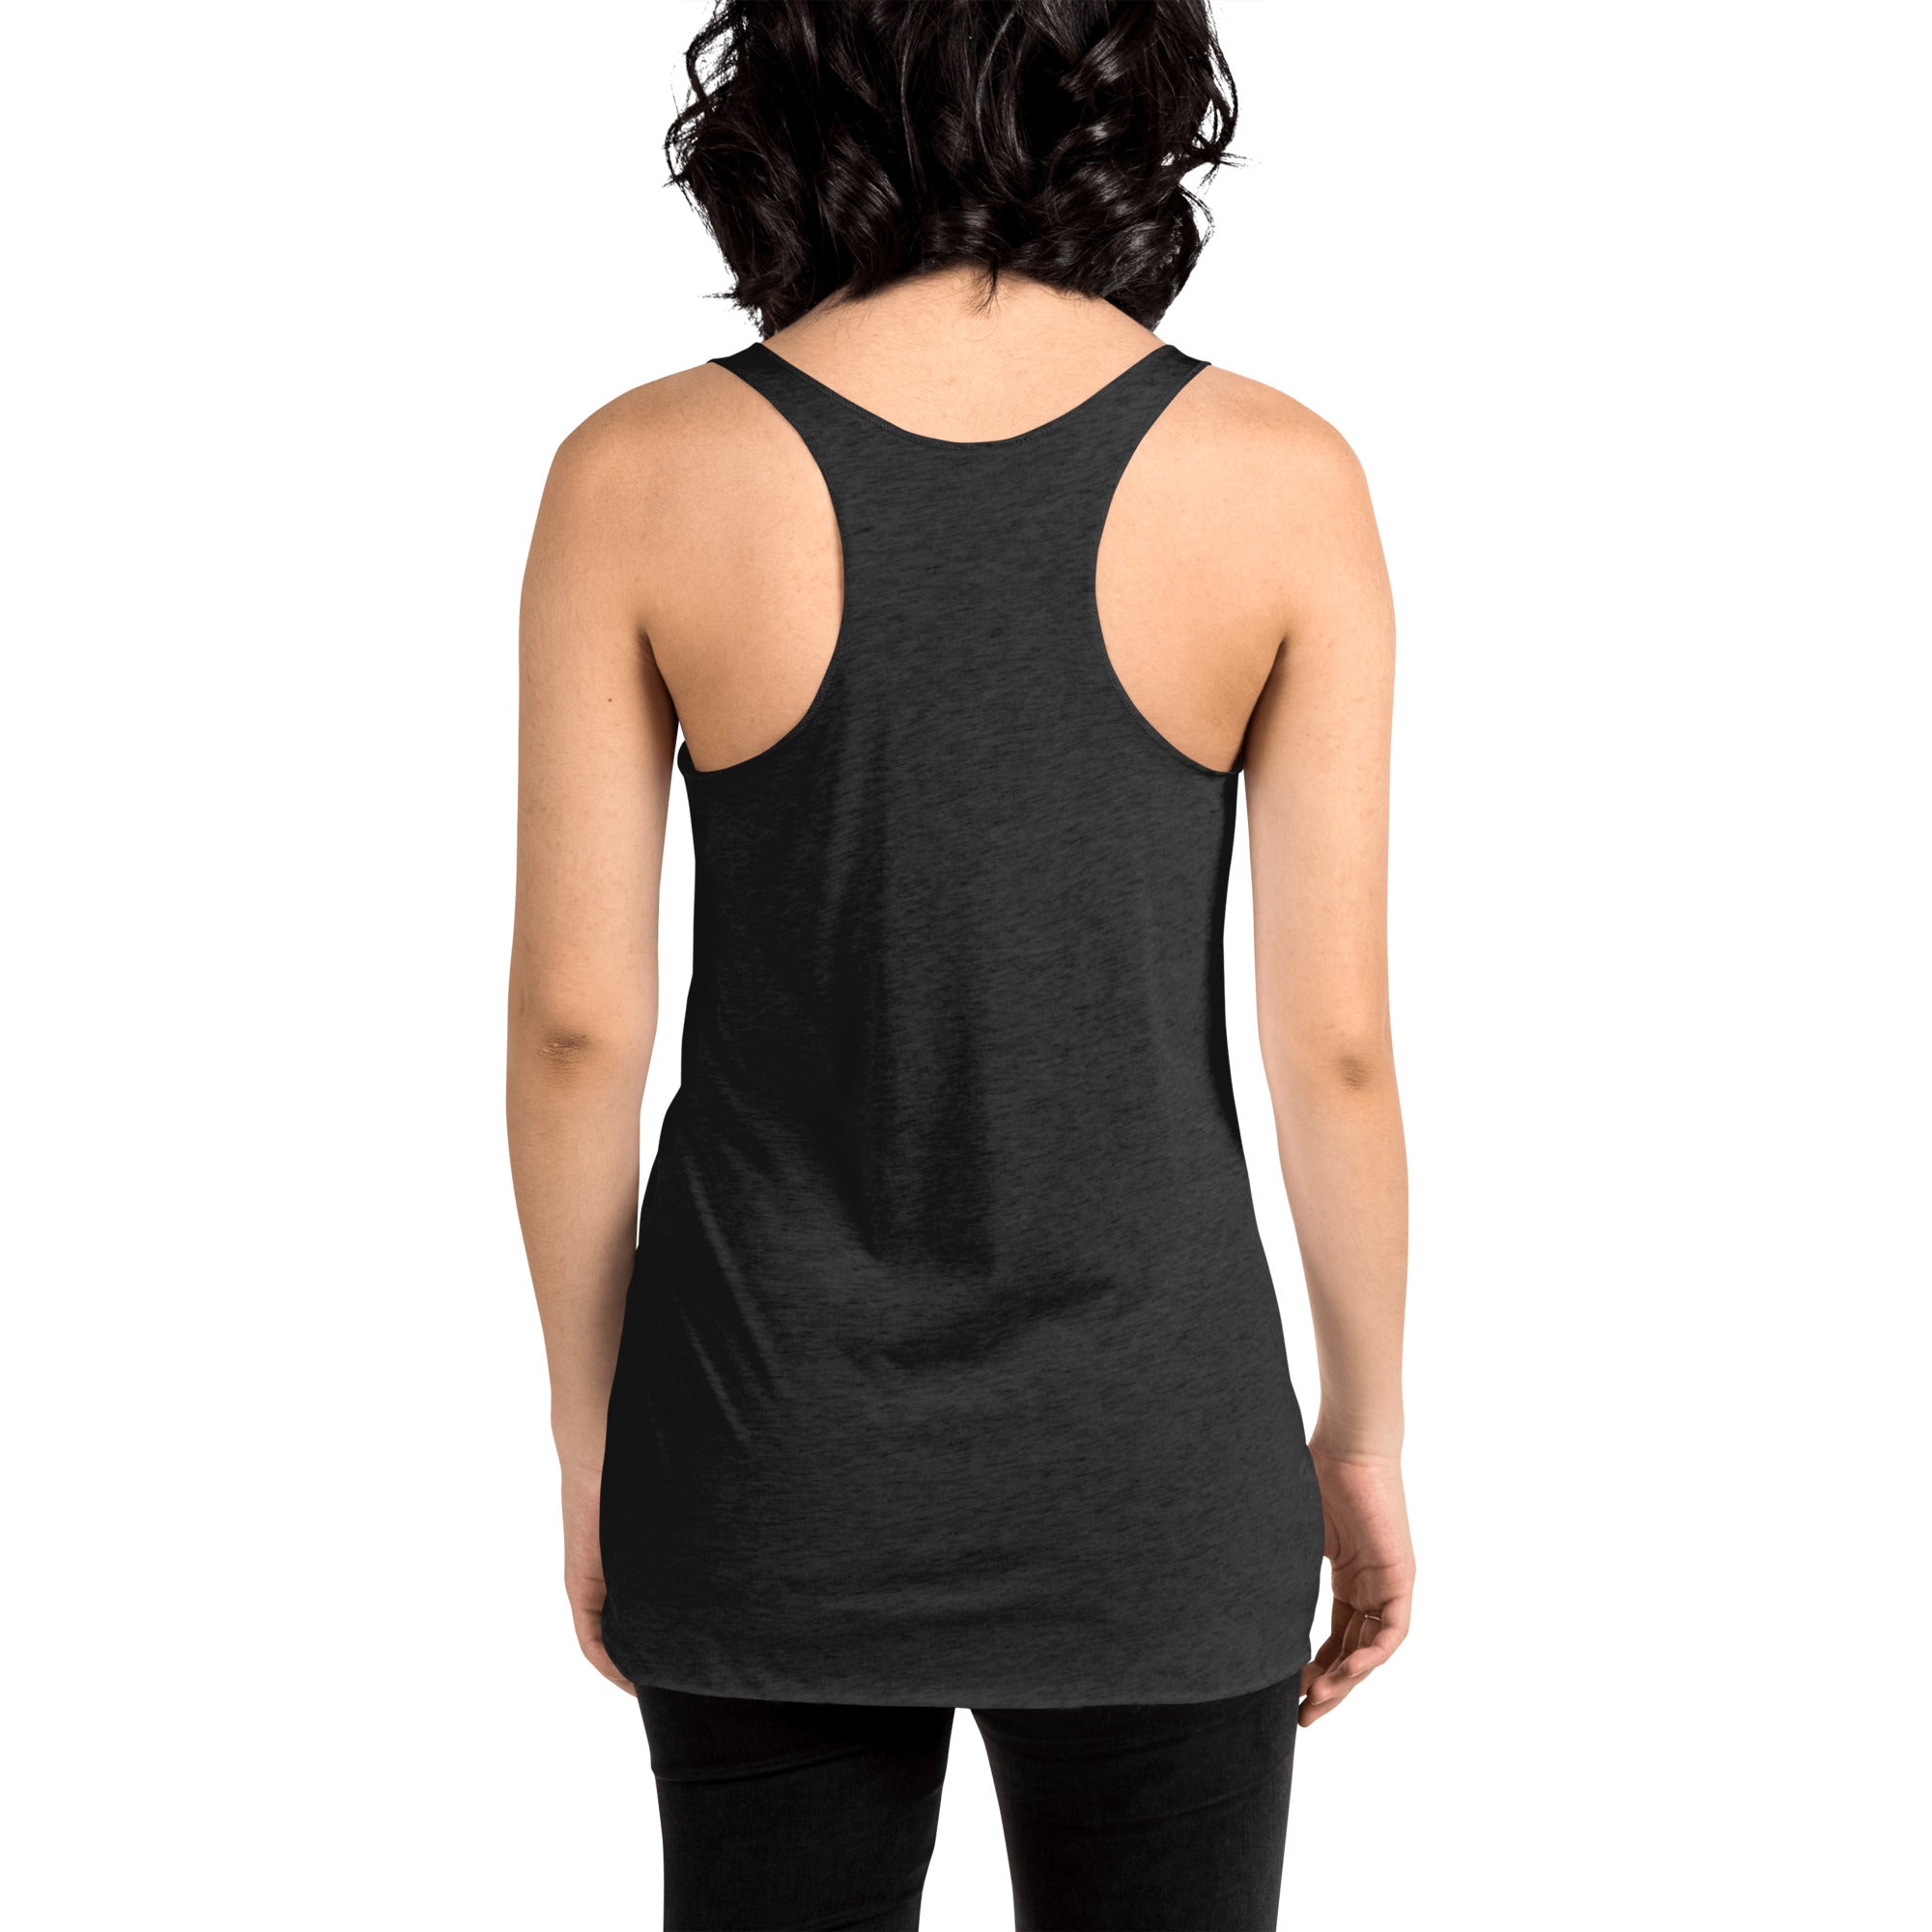 Black and Red Vertical Stripe Goth Wallpaper Style Women's Racerback Tank Top Shirt